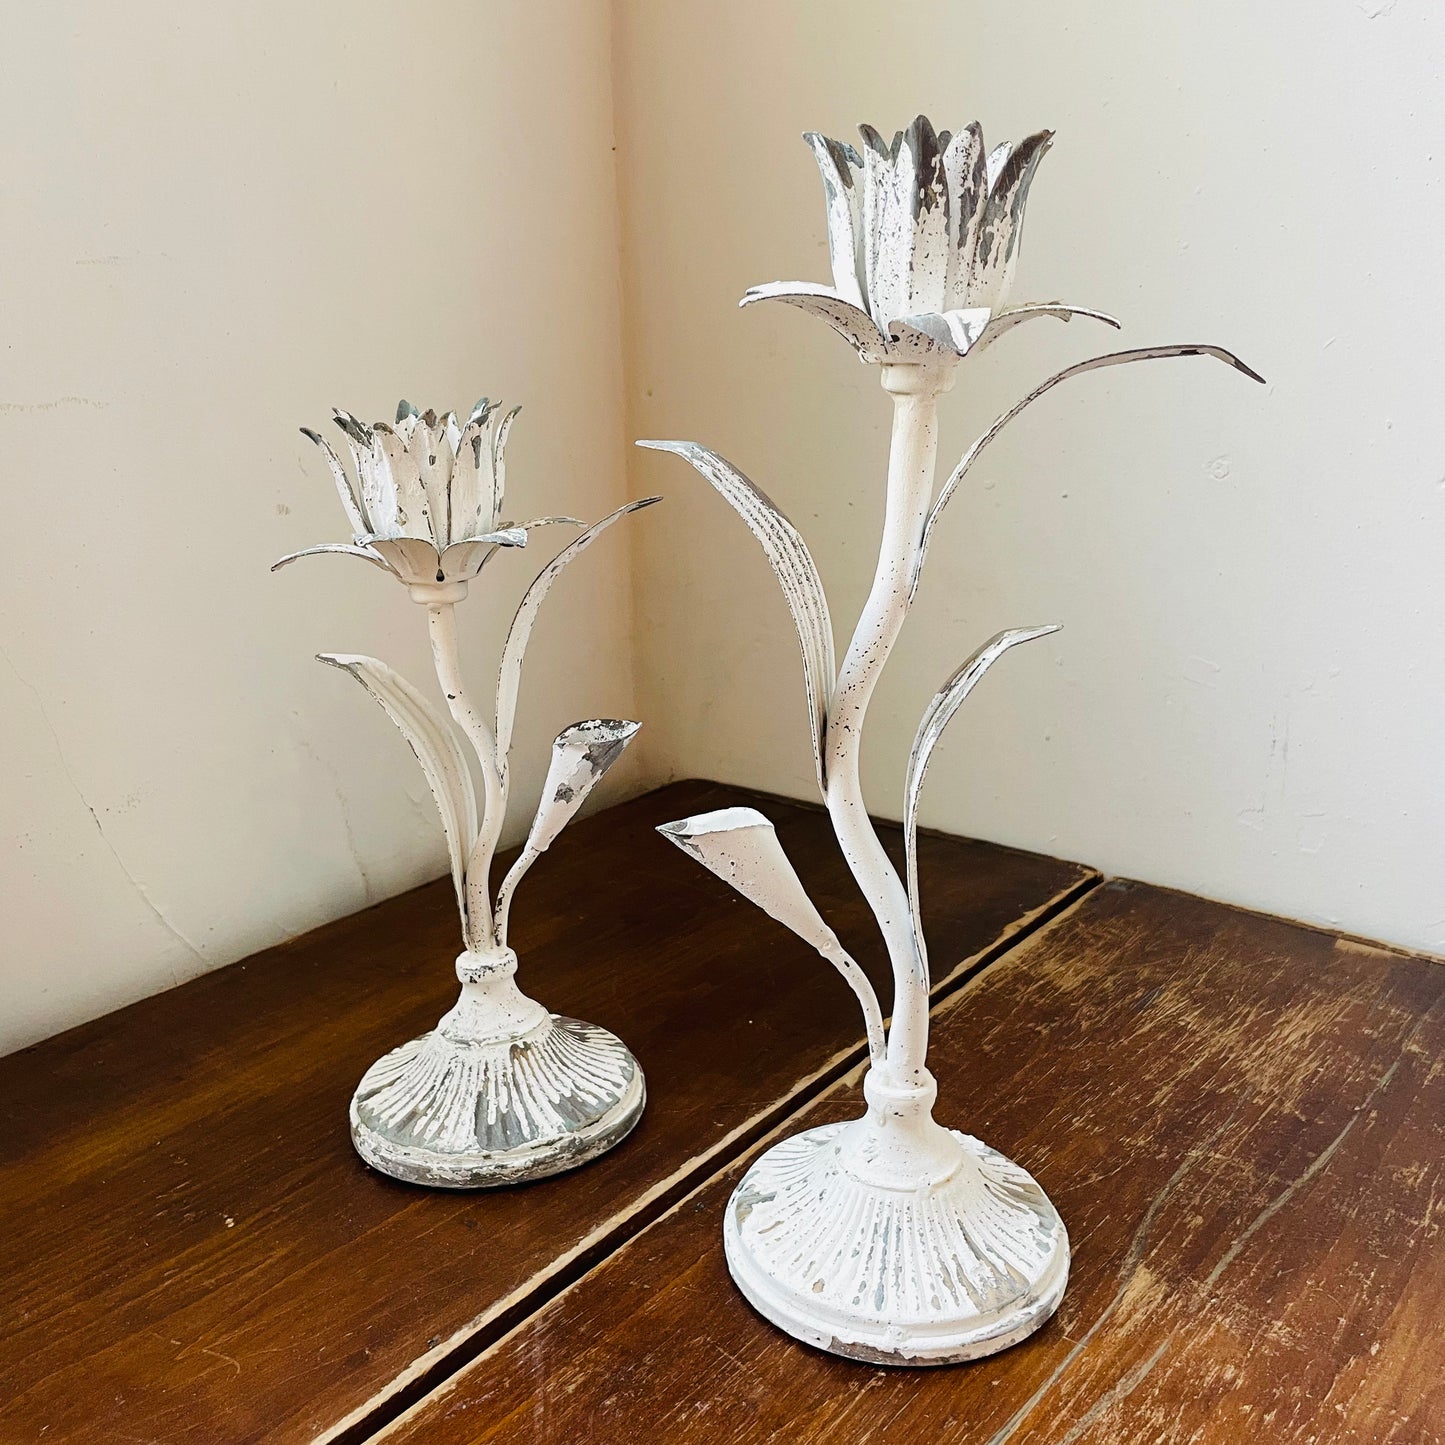 Rustic Flower Taper Candle Holder- Set of 2